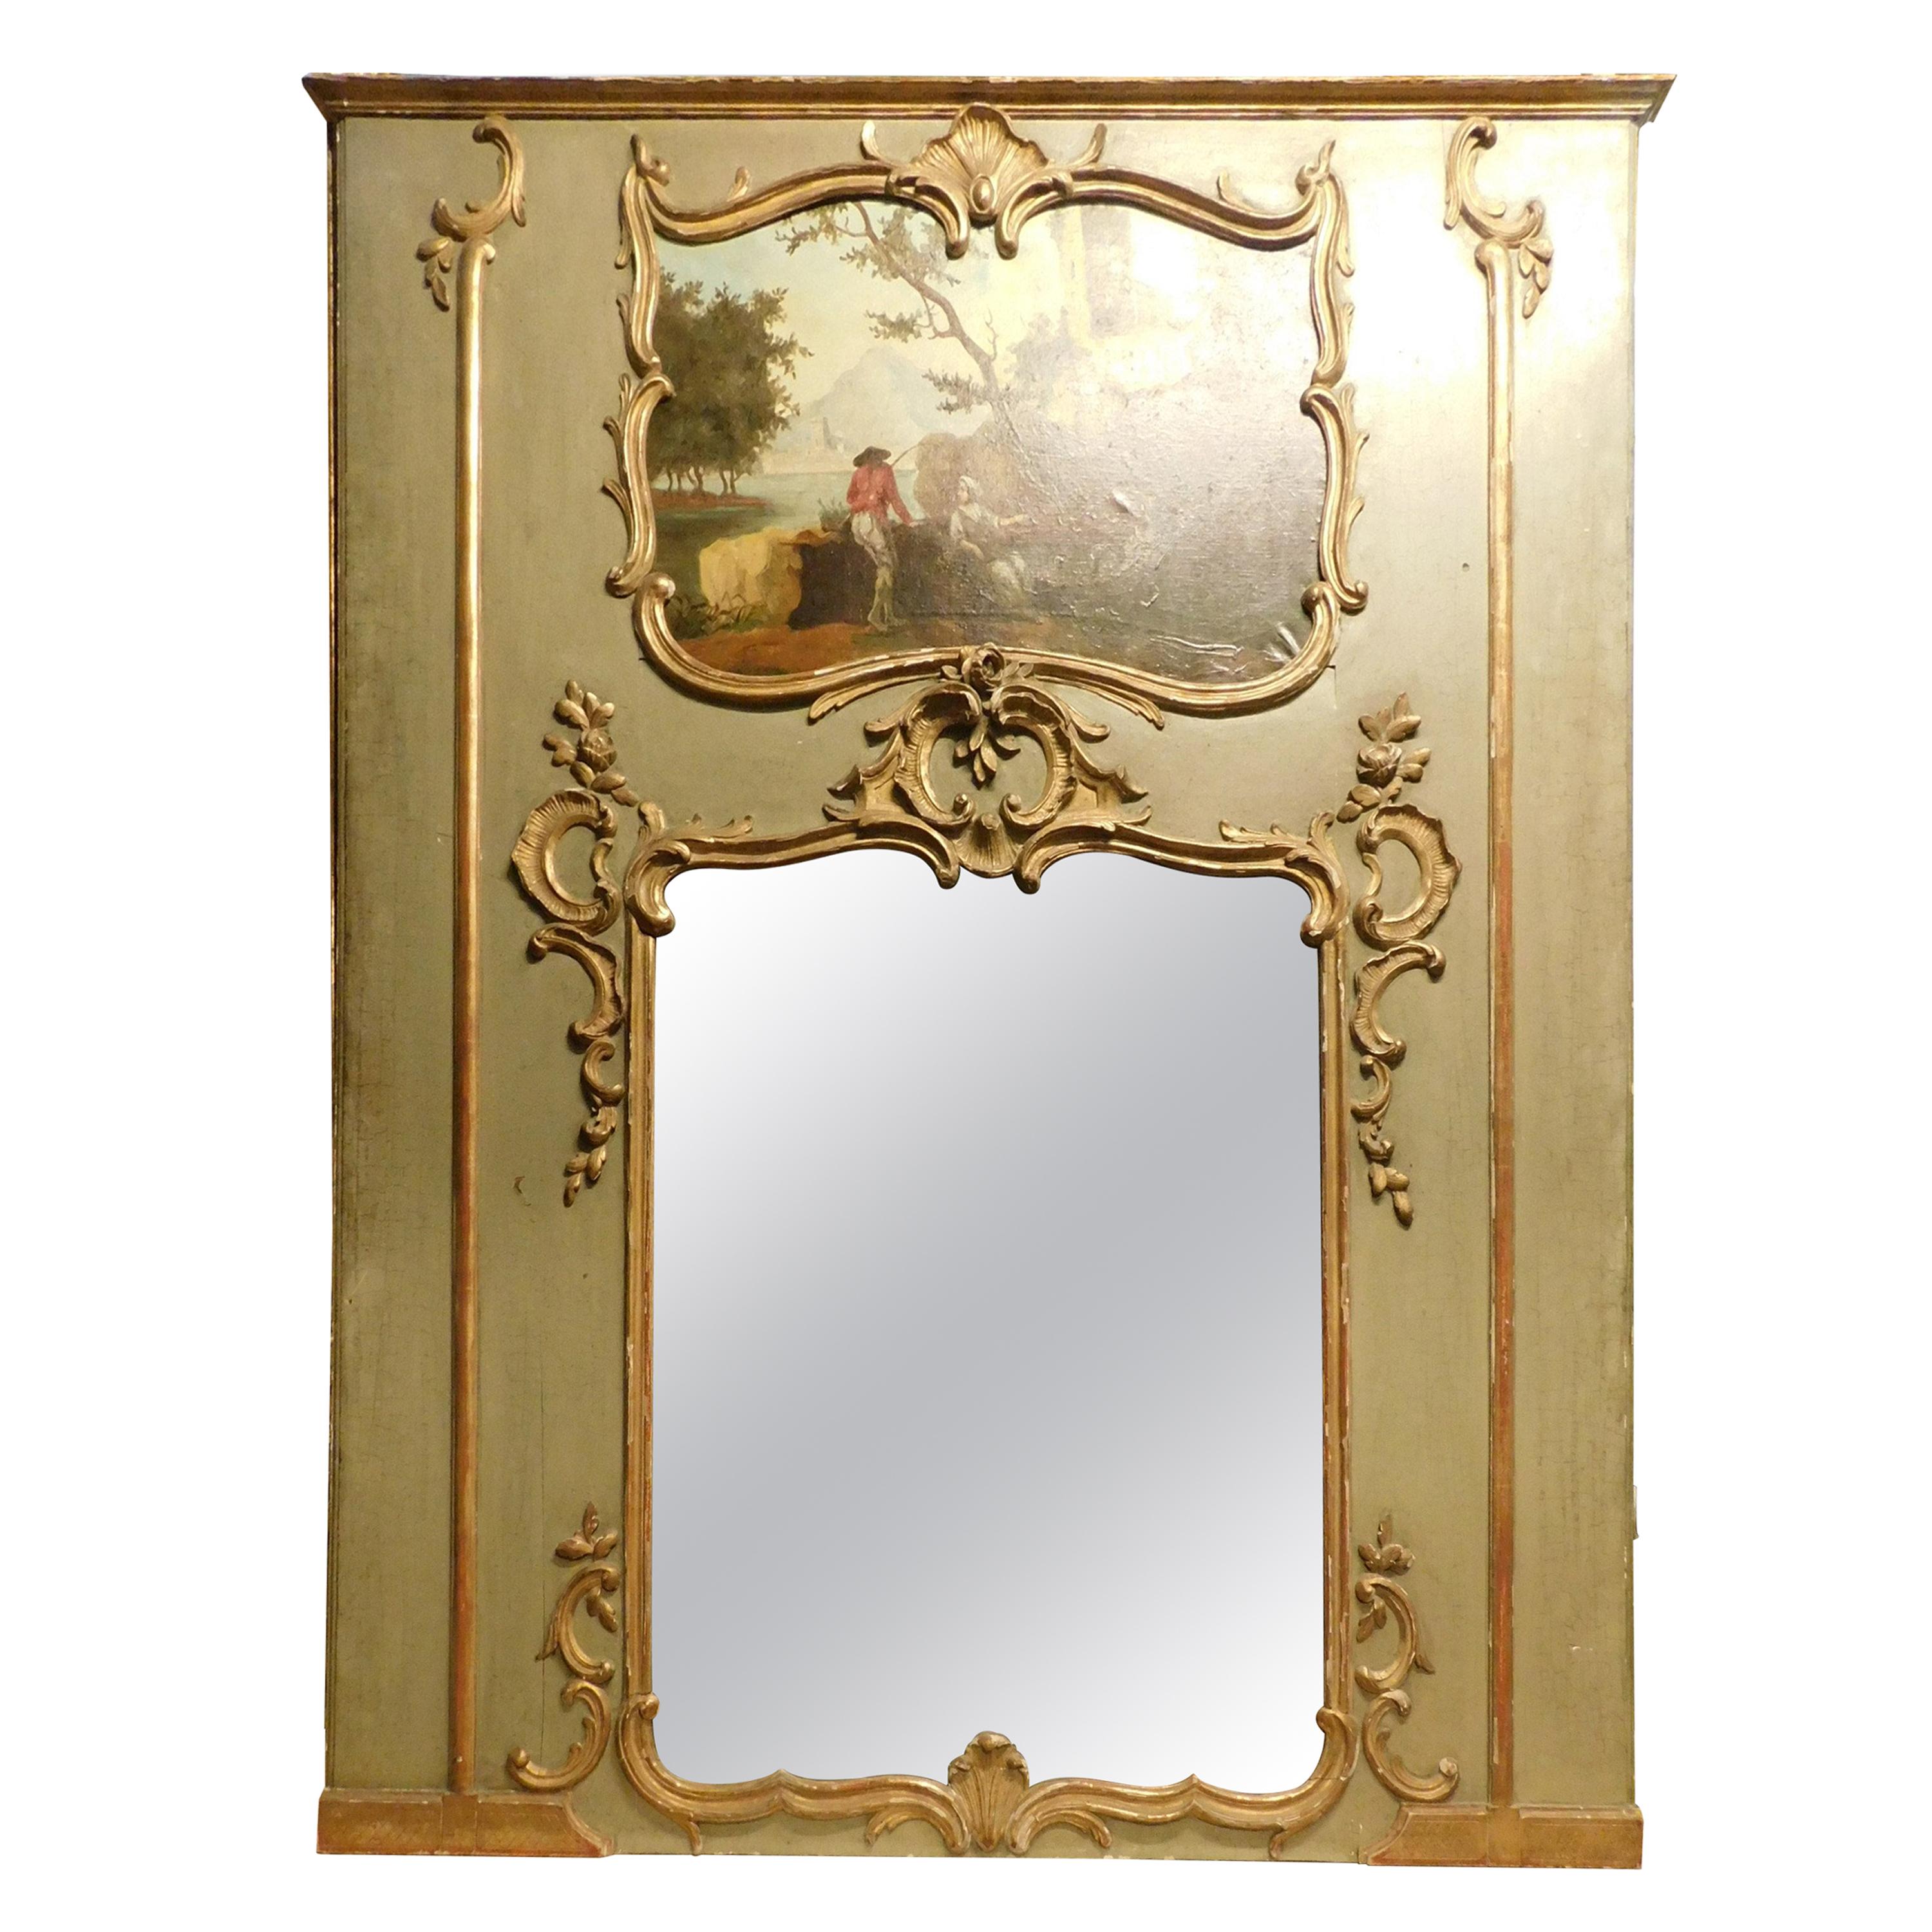 Antique Louis XVI Mirror, green and gold with painting, 18th century France